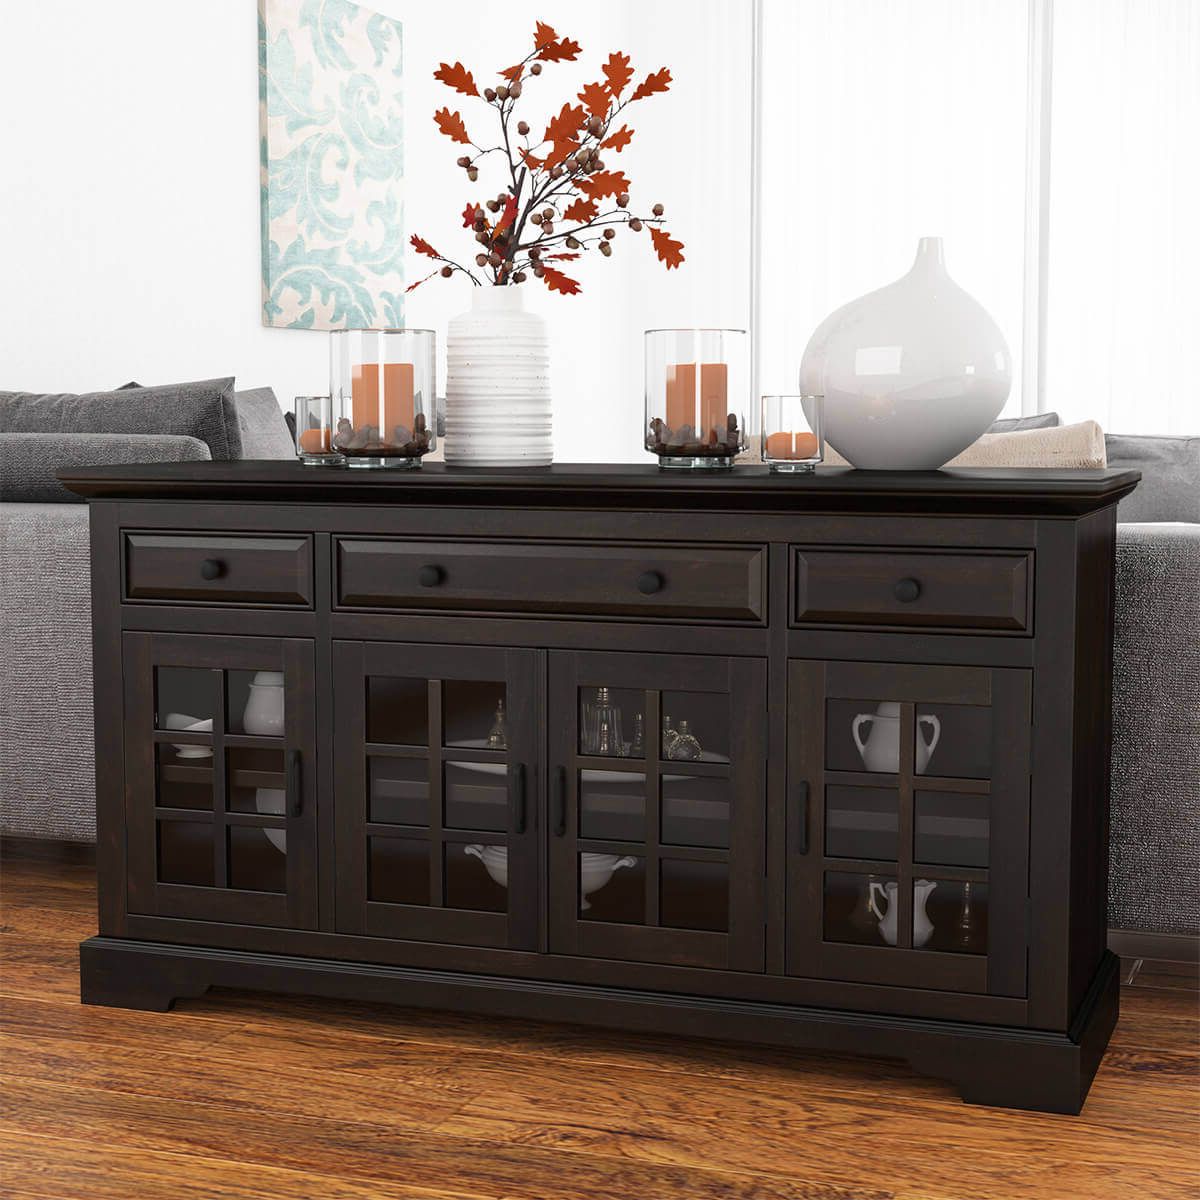 2020 Sideboards With 3 Drawers With Tirana Rustic Solid Wood Glass Door 3 Drawer Large Sideboard Cabinet (View 6 of 15)